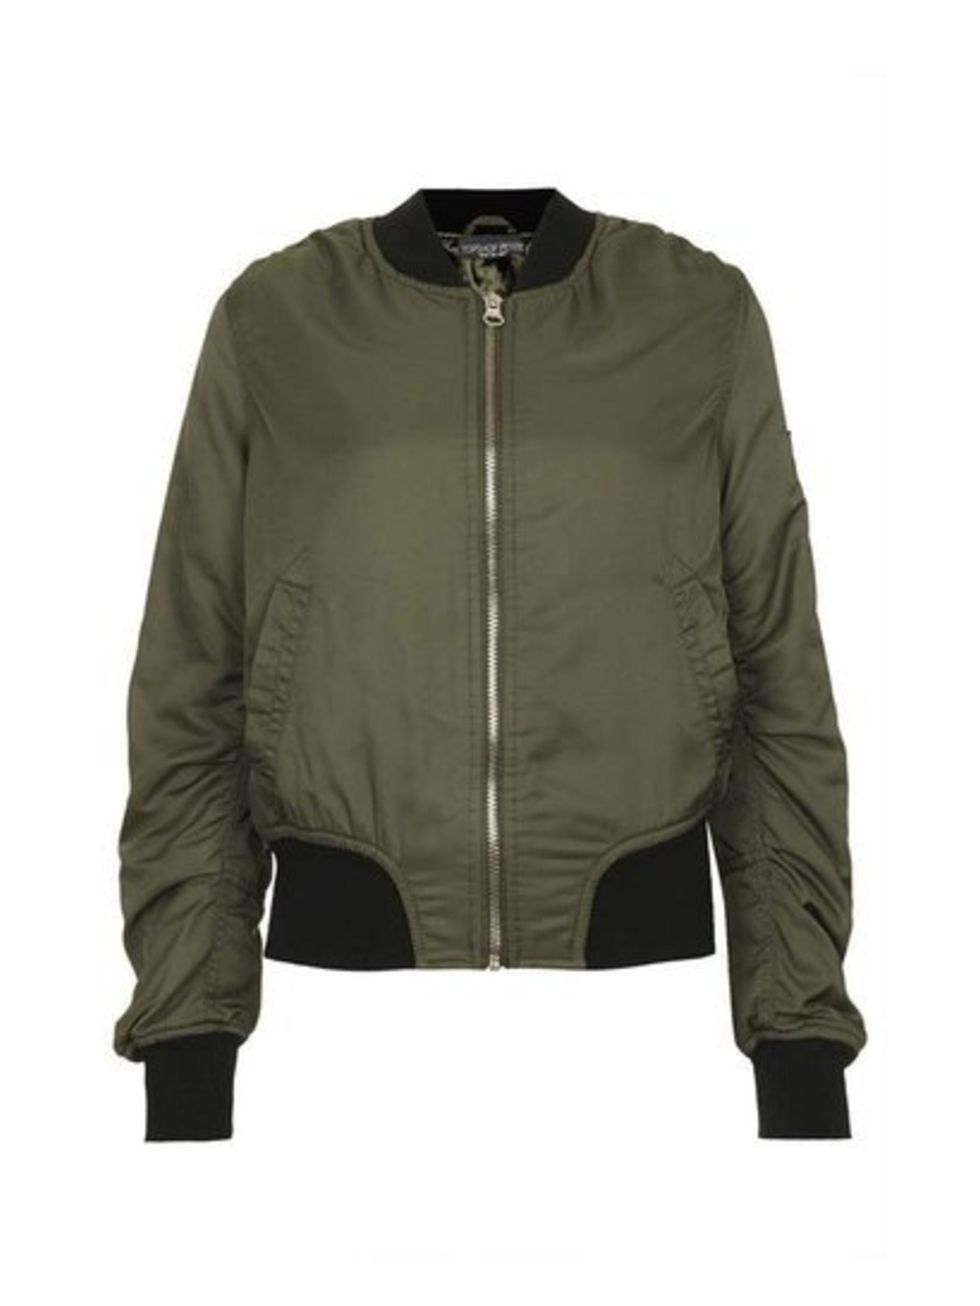 The MA1 flight jacket was spotted on more a/w 2014 catwalks than we could count.

Topshop jacket, £55